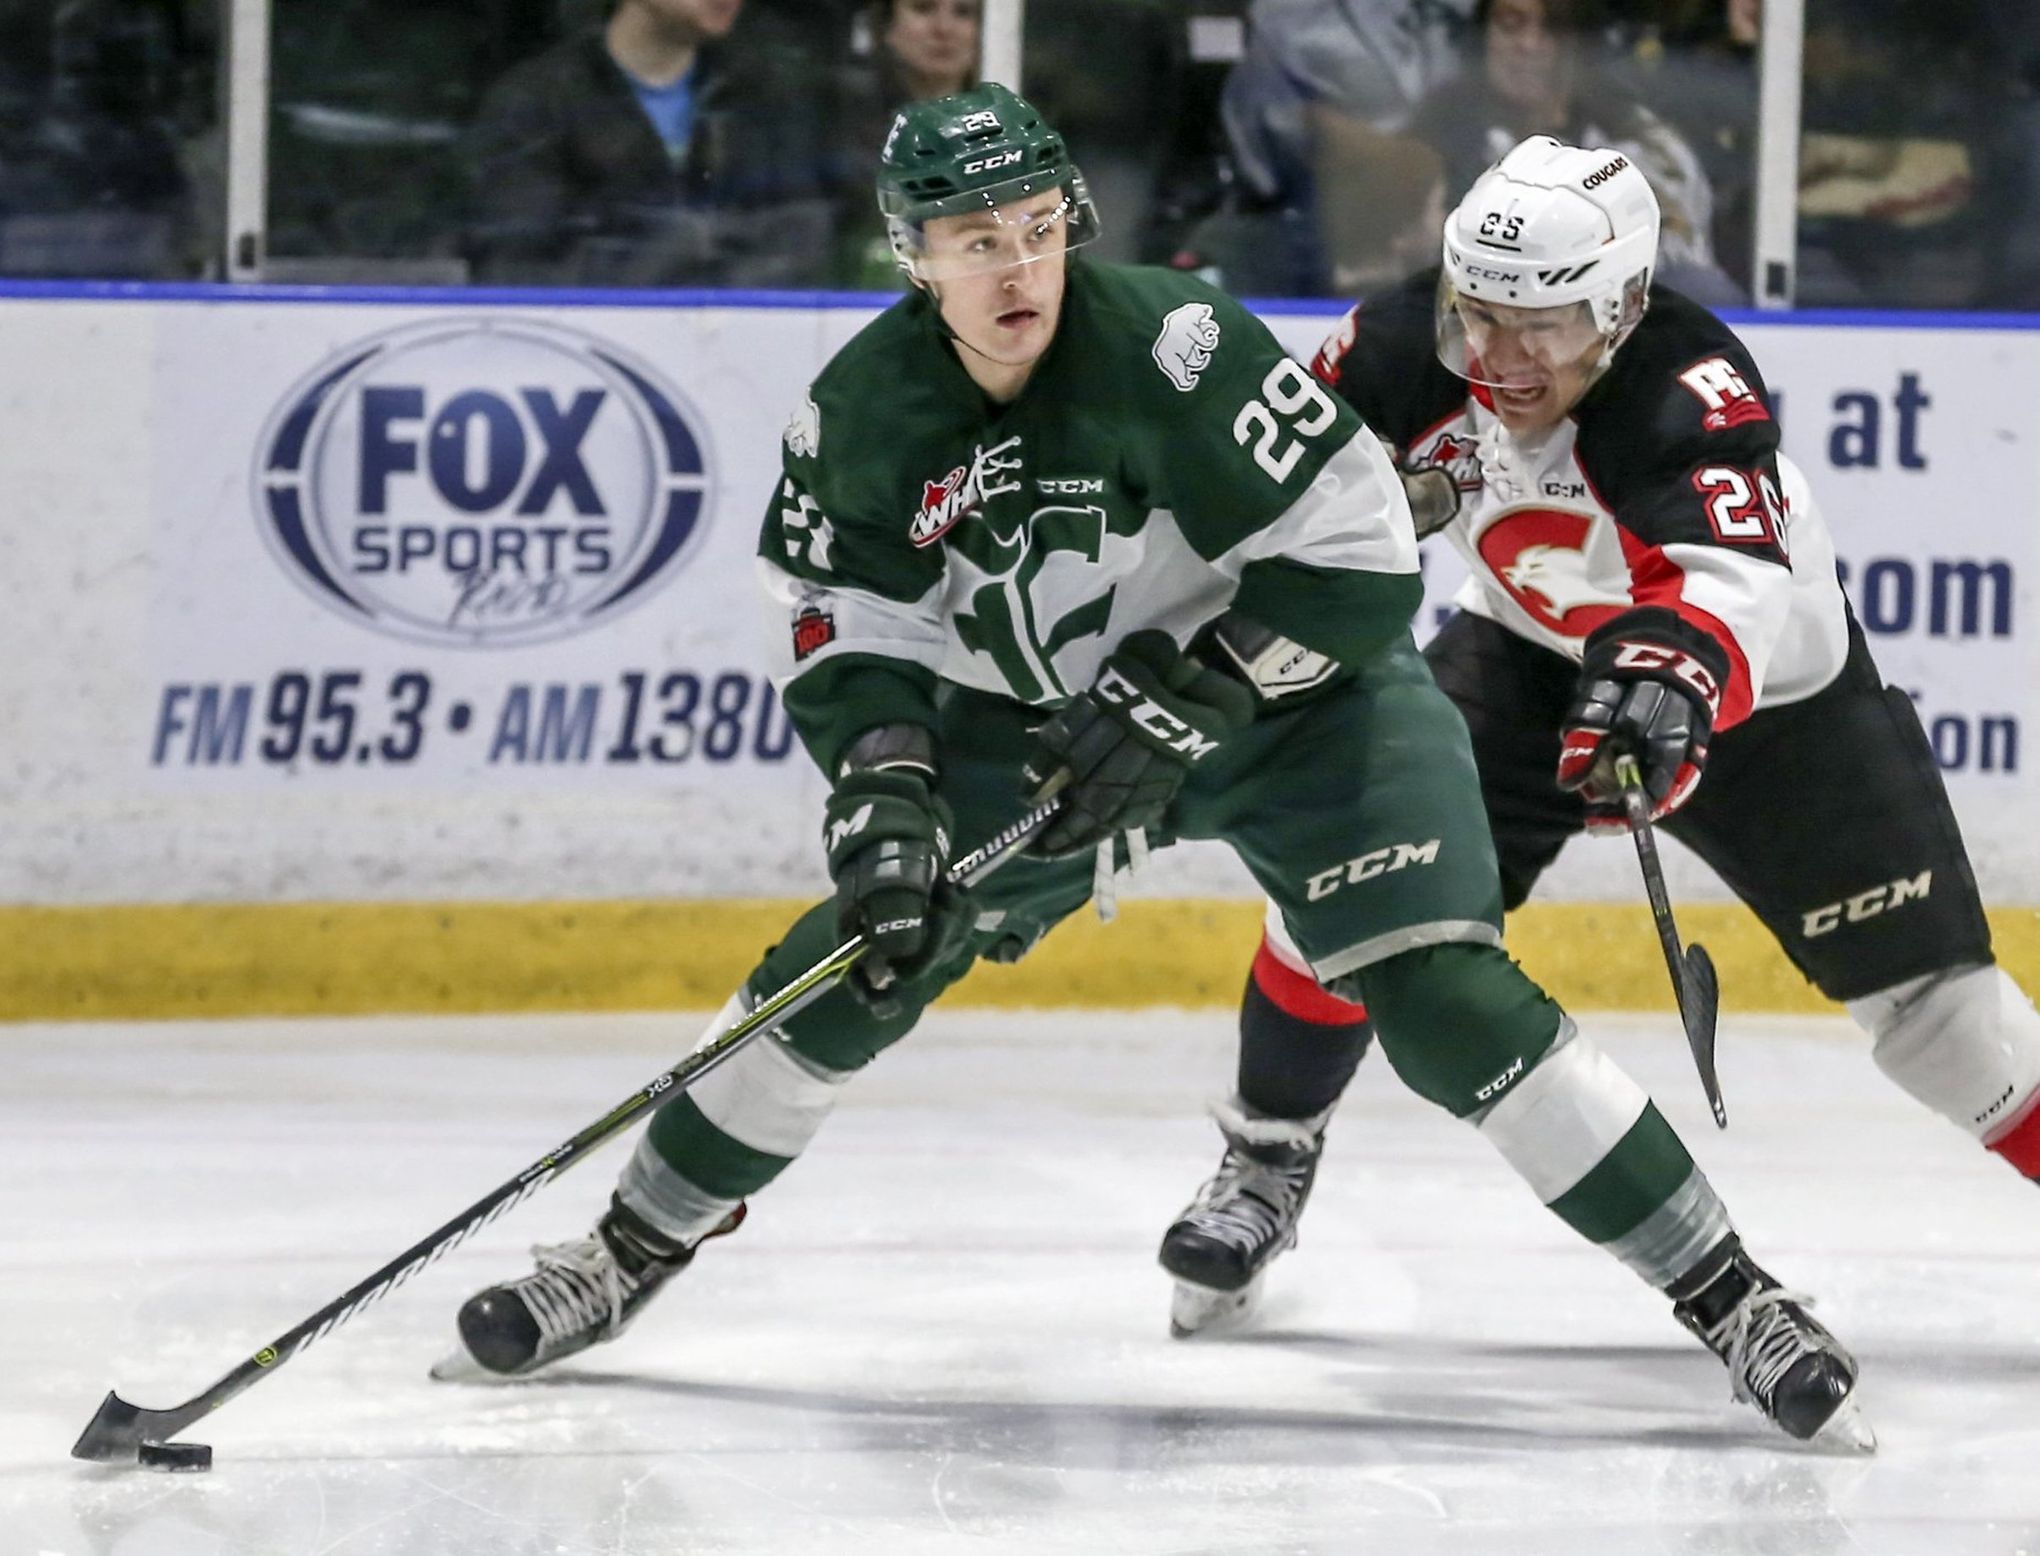 Silvertips hockey season on ice for now, another hit to Everett's economy